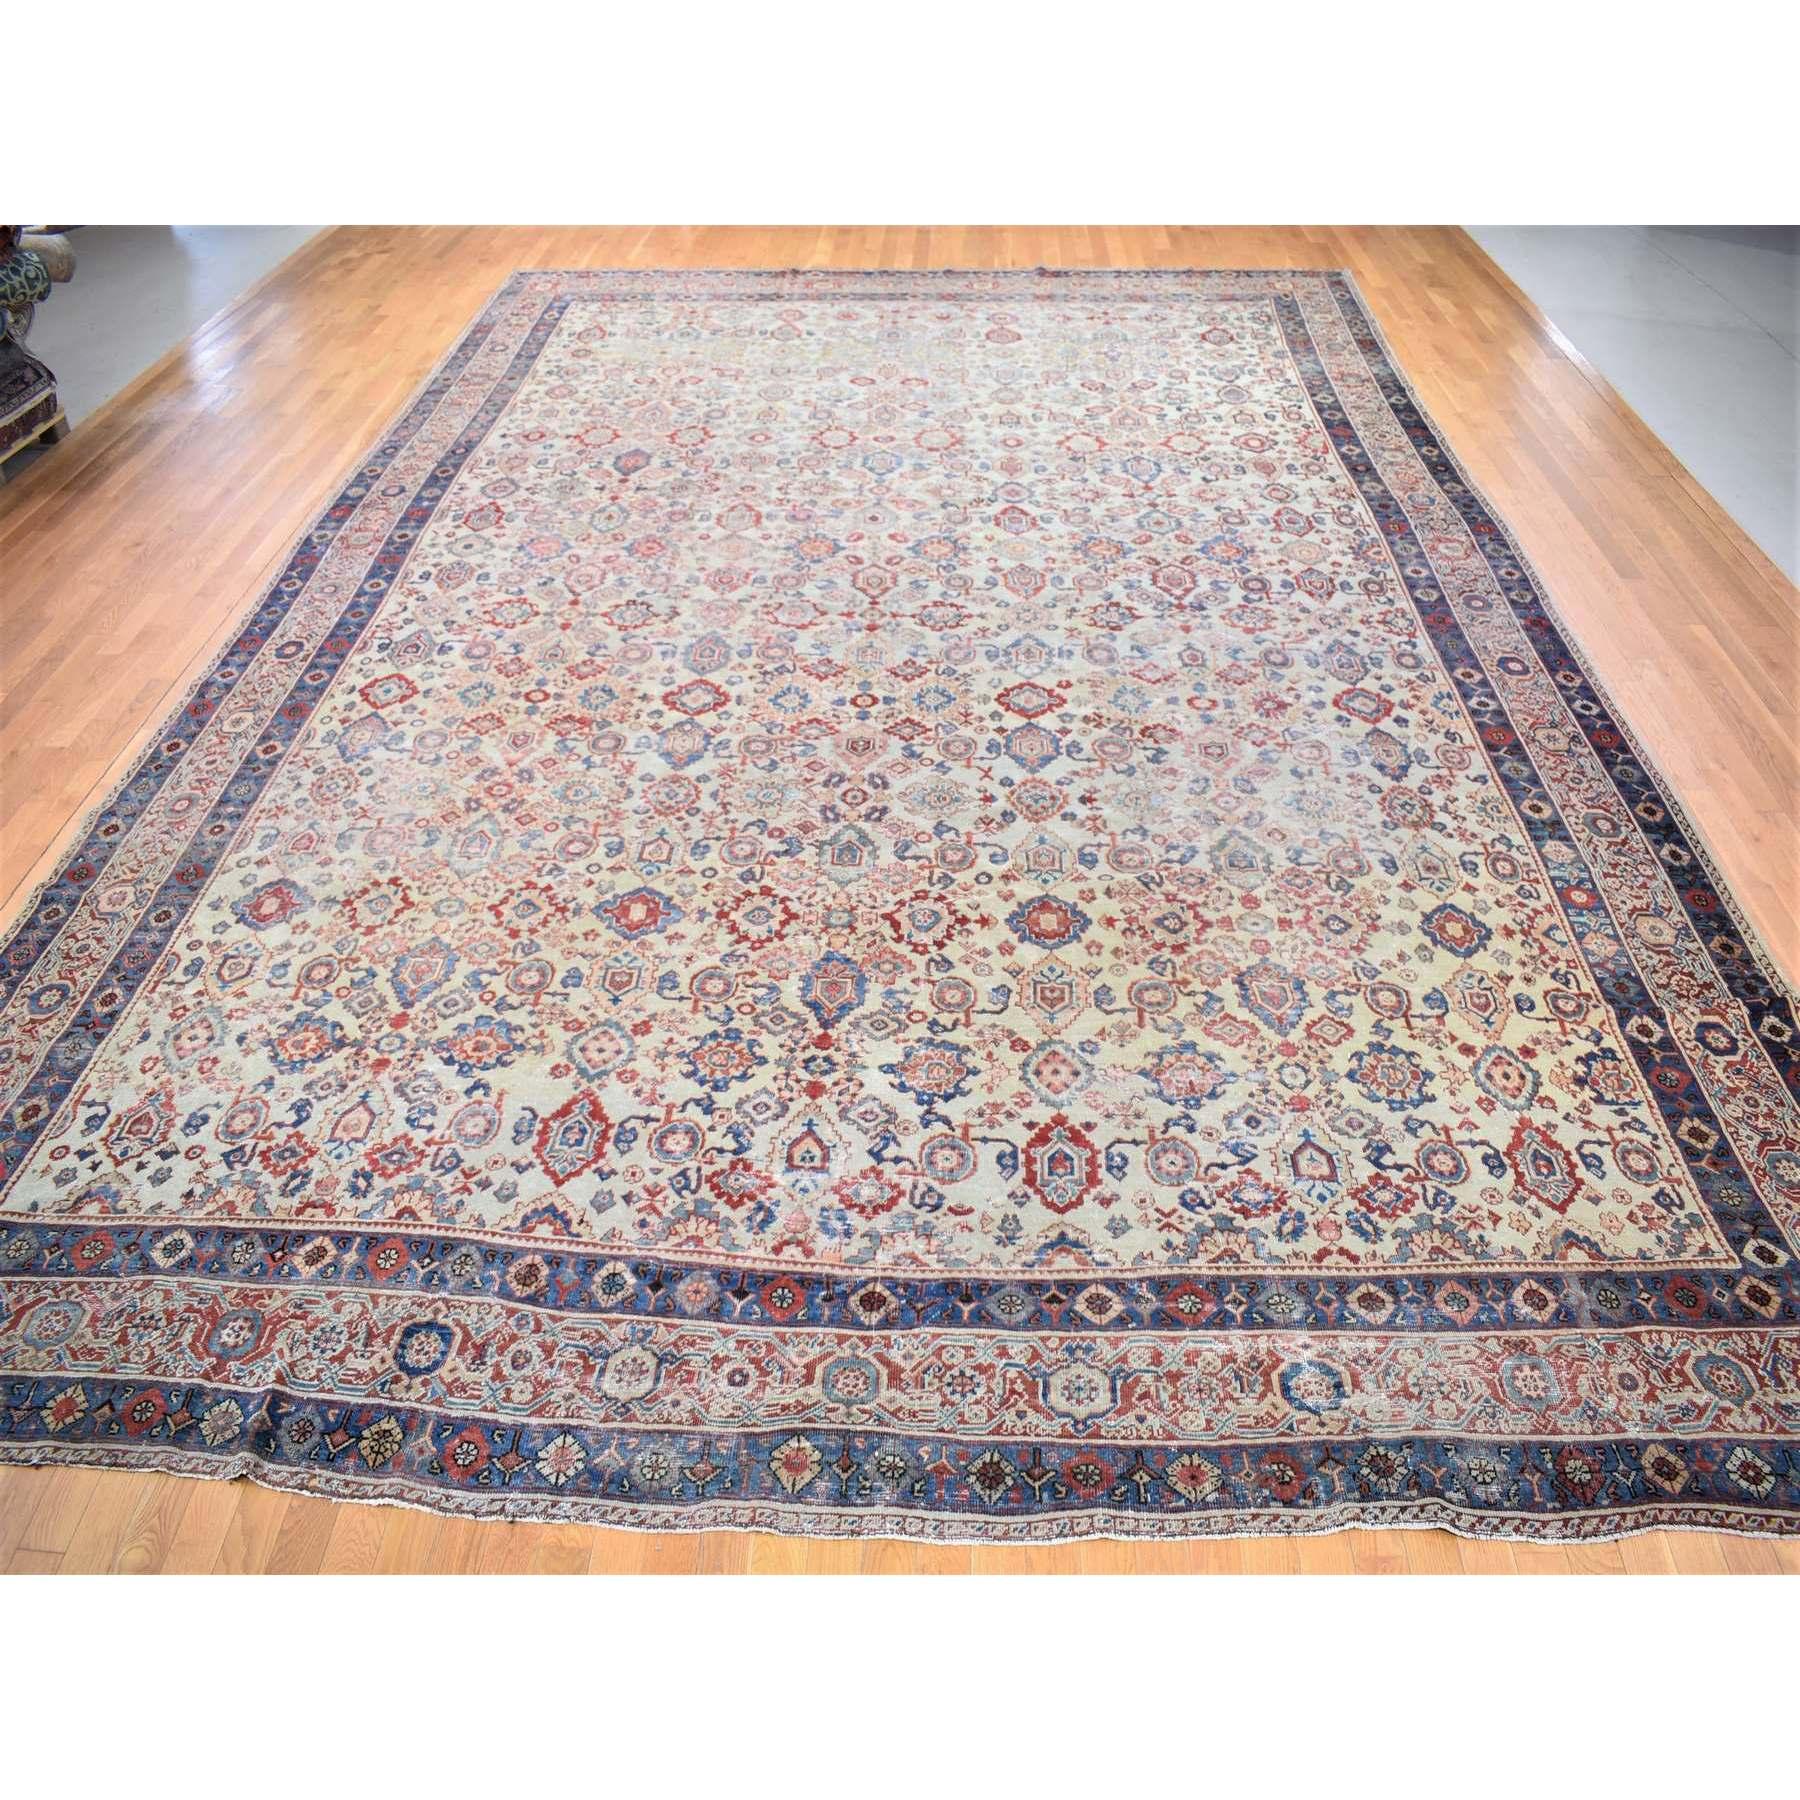 Medieval Beige, Handmade Antique Persian Mahal, Areas of Wear, Pure Wool, Oversized Rug For Sale